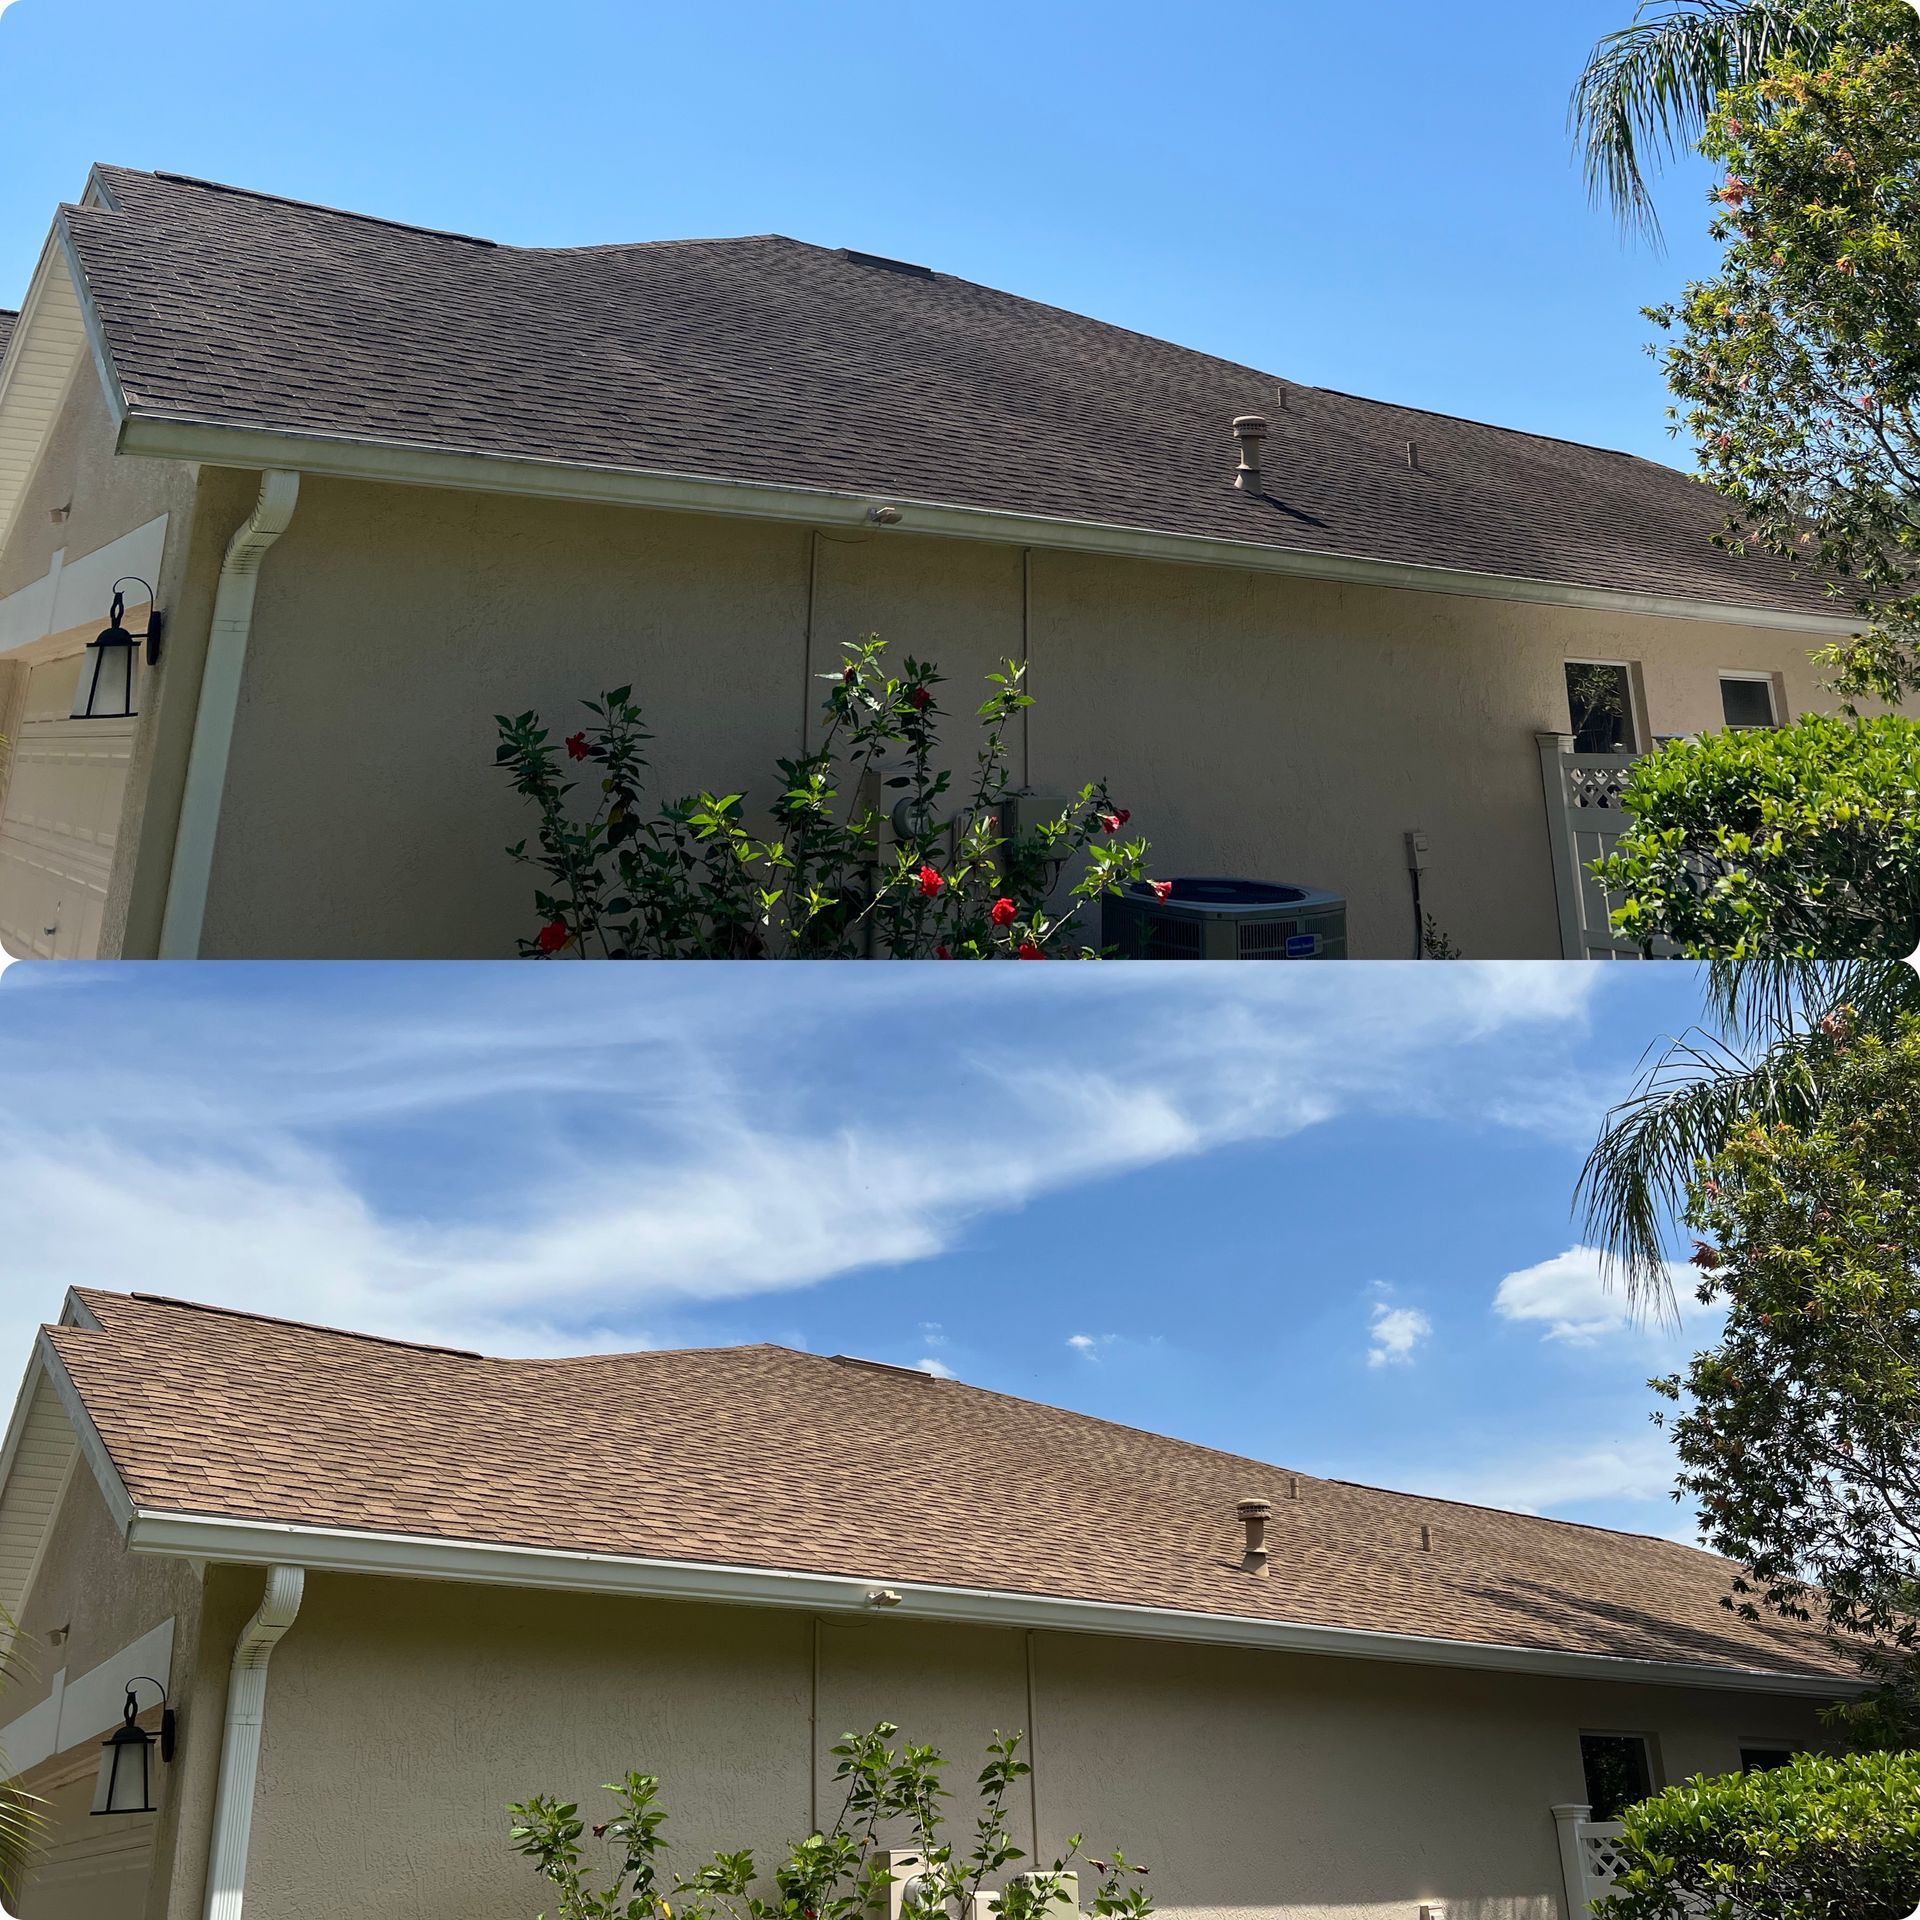 A before and after picture of a house 's roof